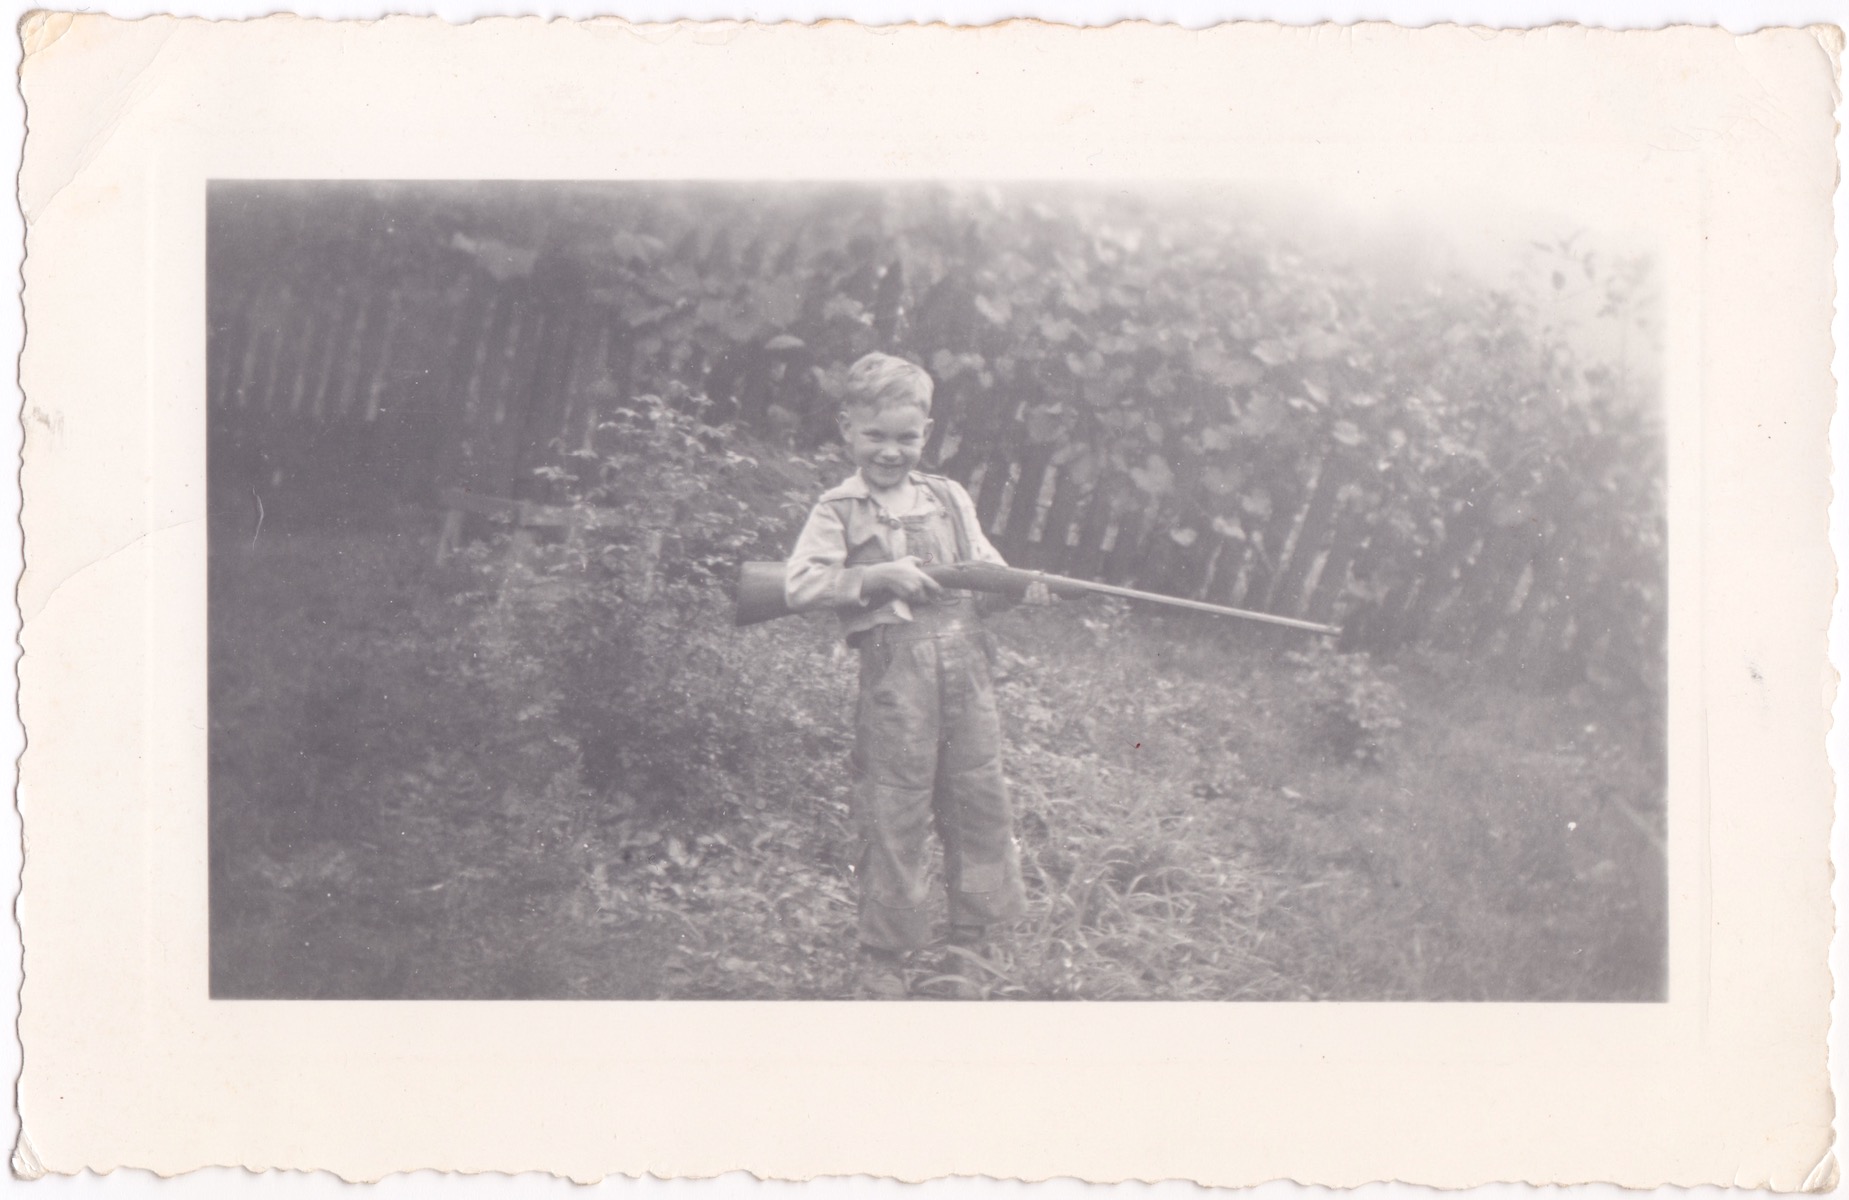 K.C. Potter, mountain boy, at his grandmother Mollette’s home, near Tomahawk, KY.